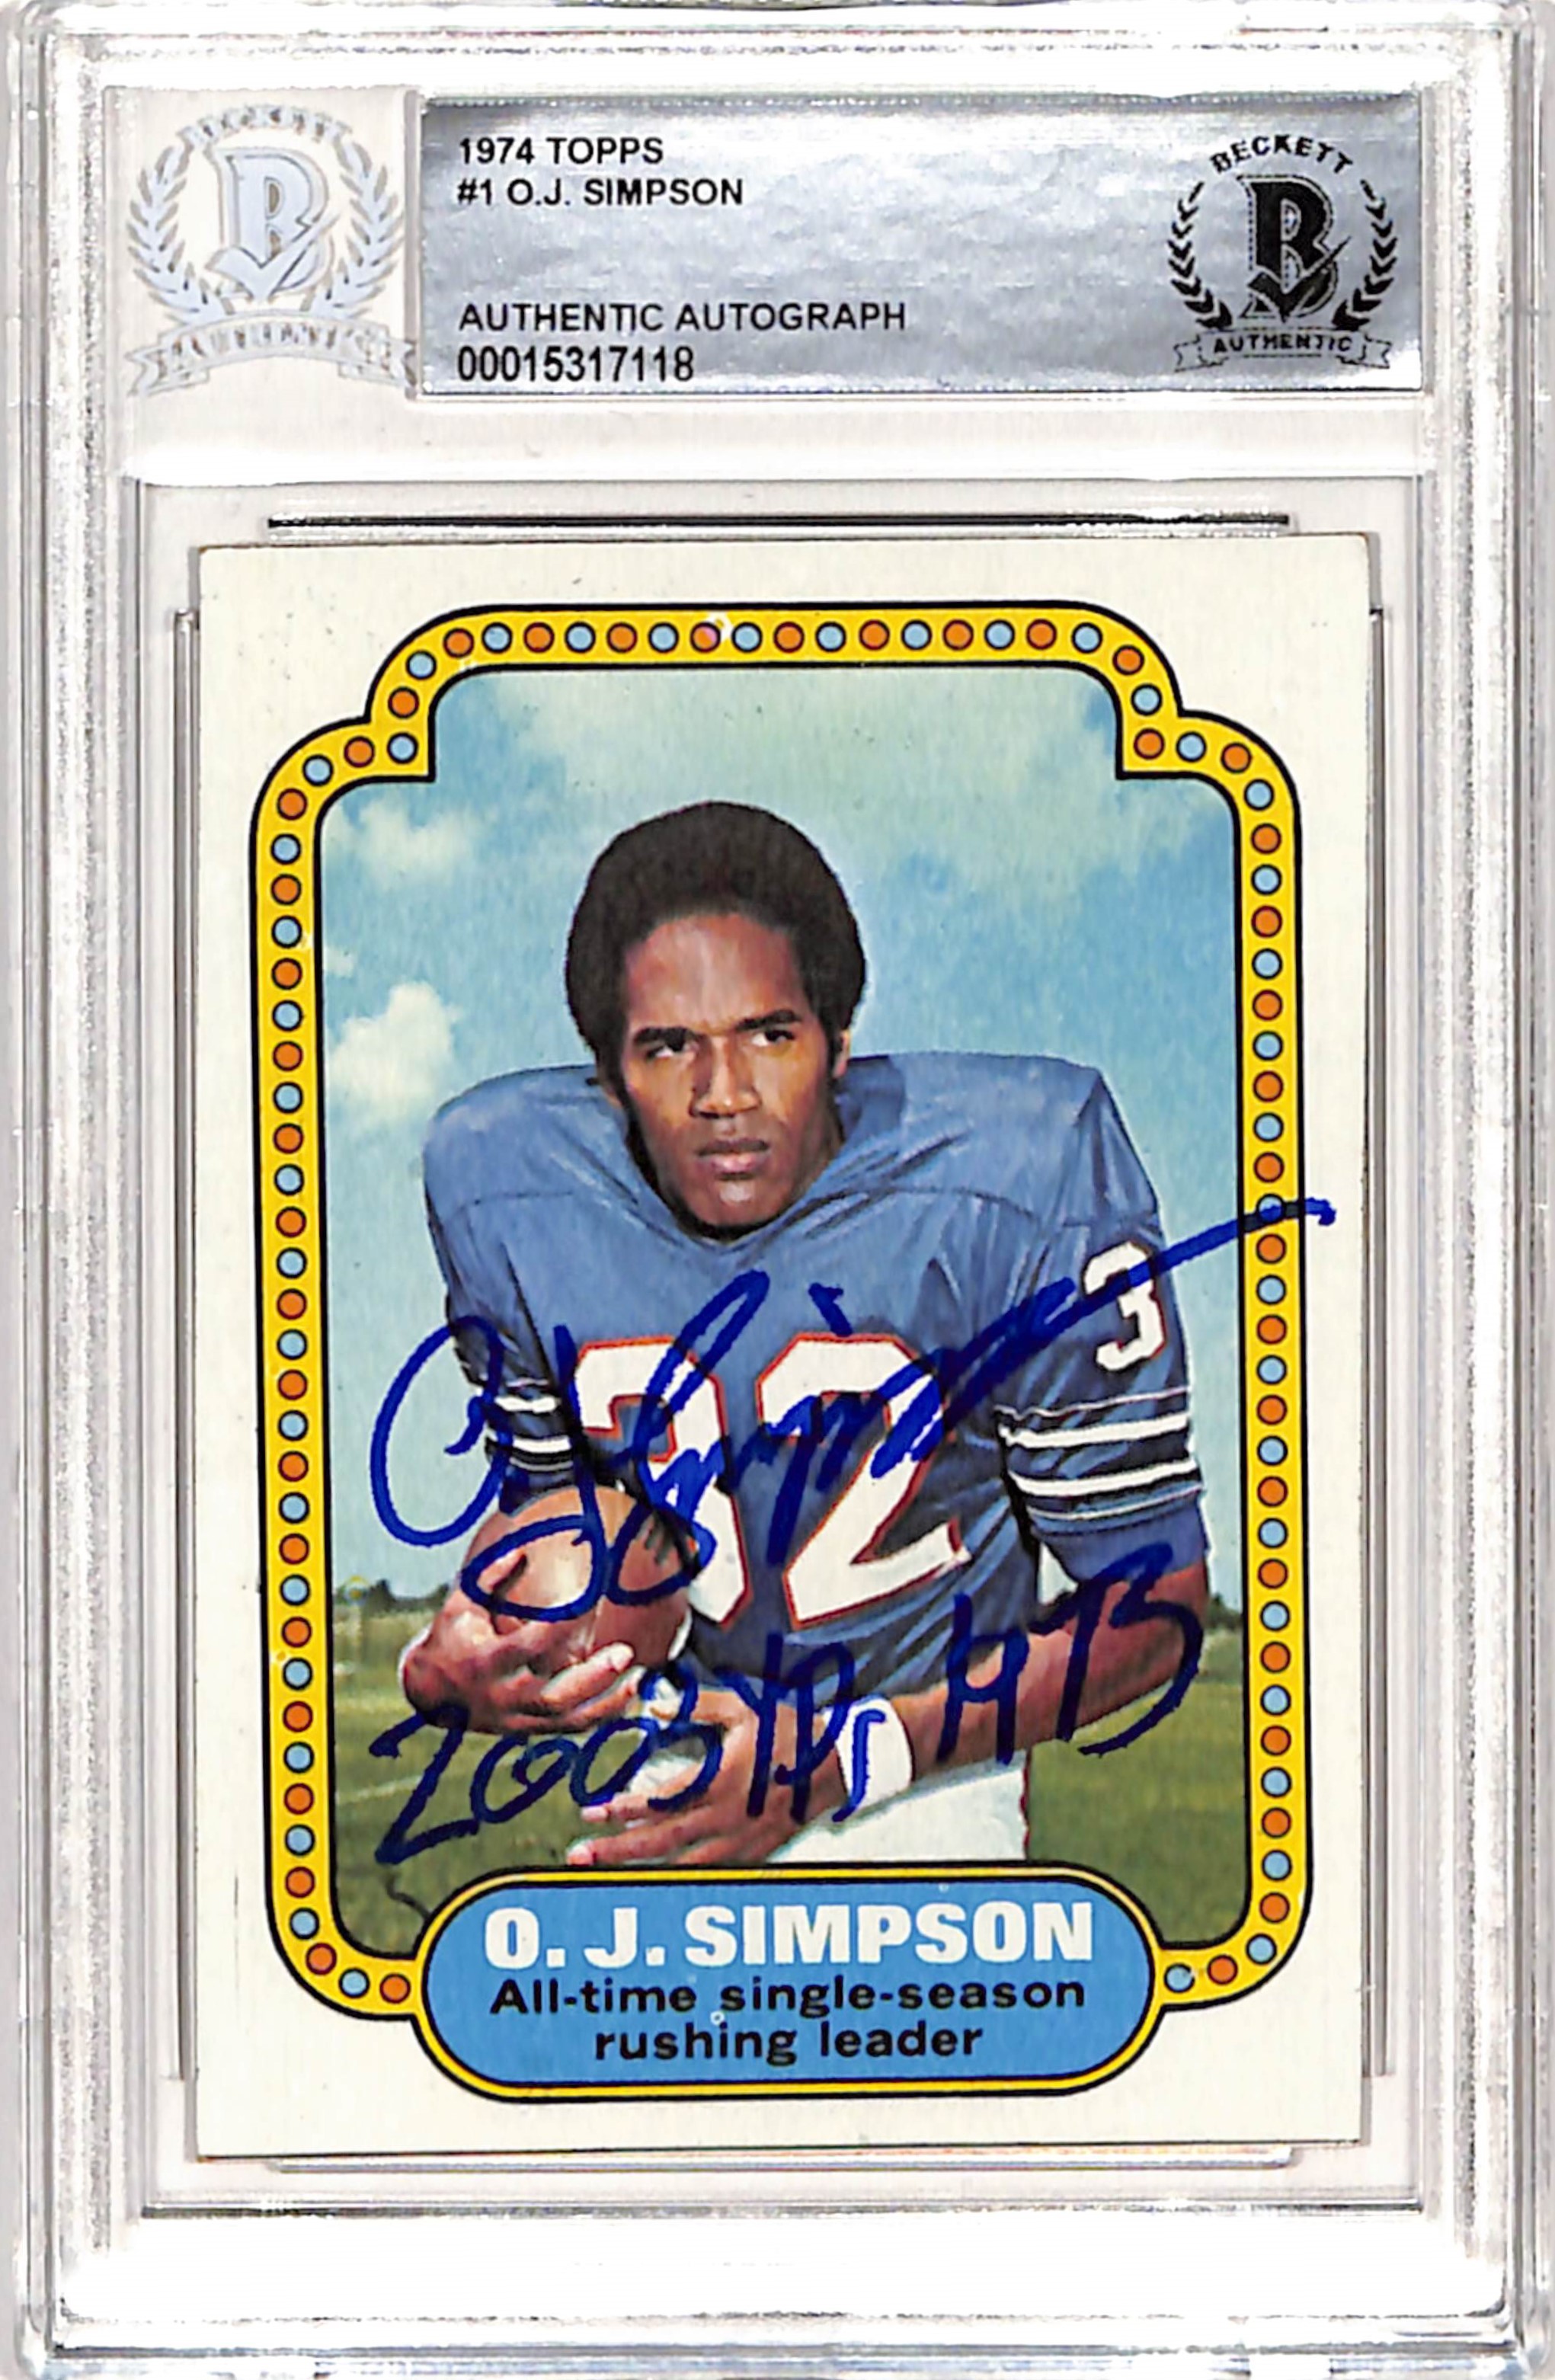 OJ Simpson Autographed/Signed 1974 Topps "2003 Yds" Trading Card BAS